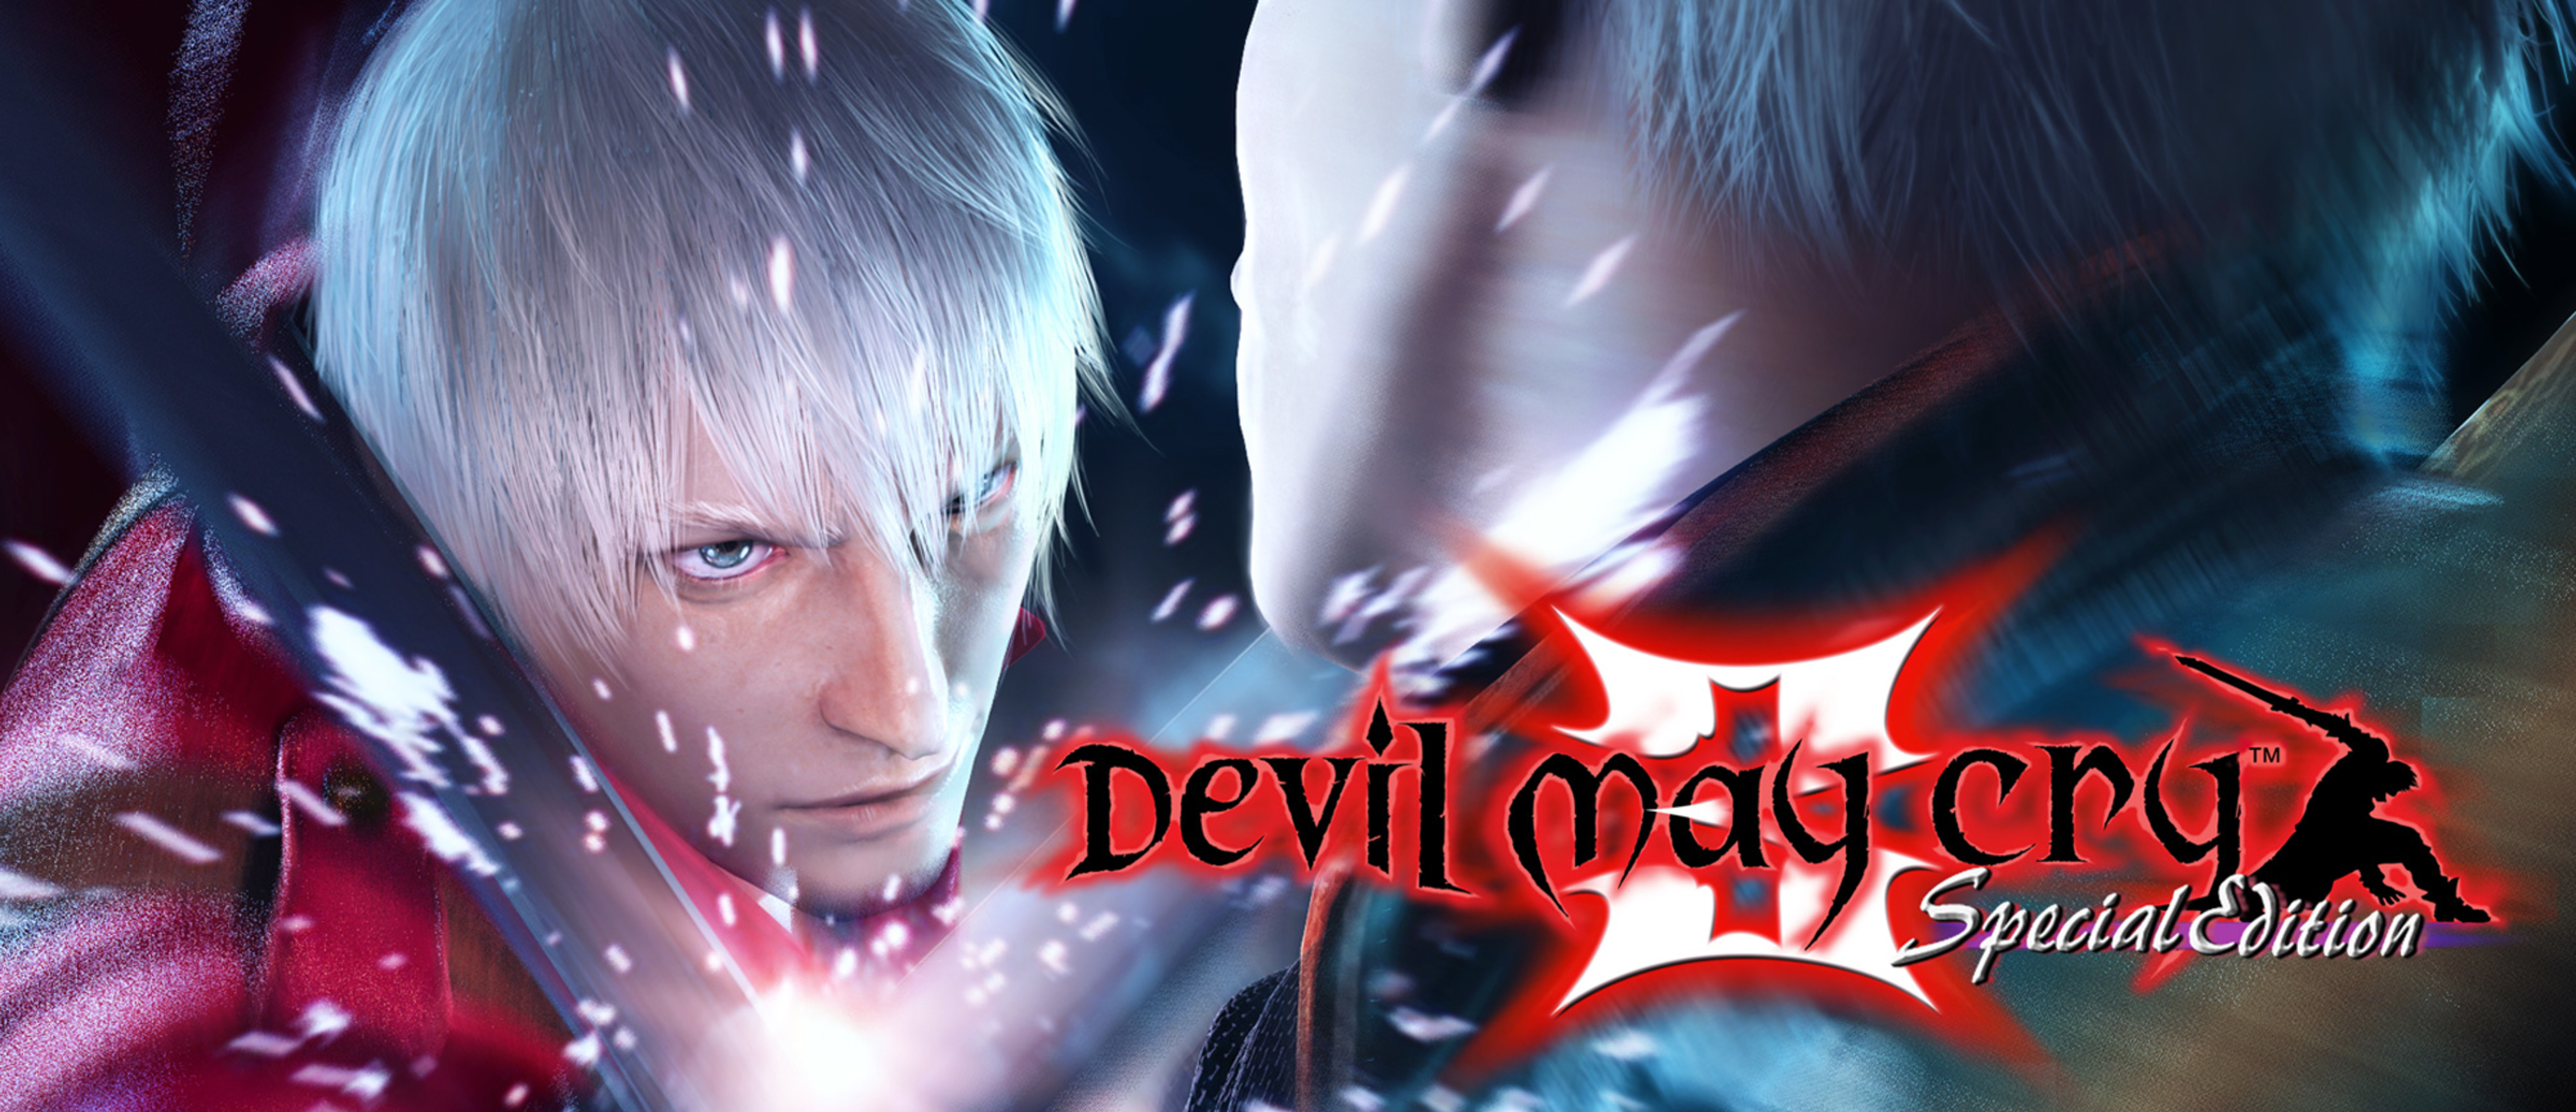 Devil may cry 3 can find steam фото 22